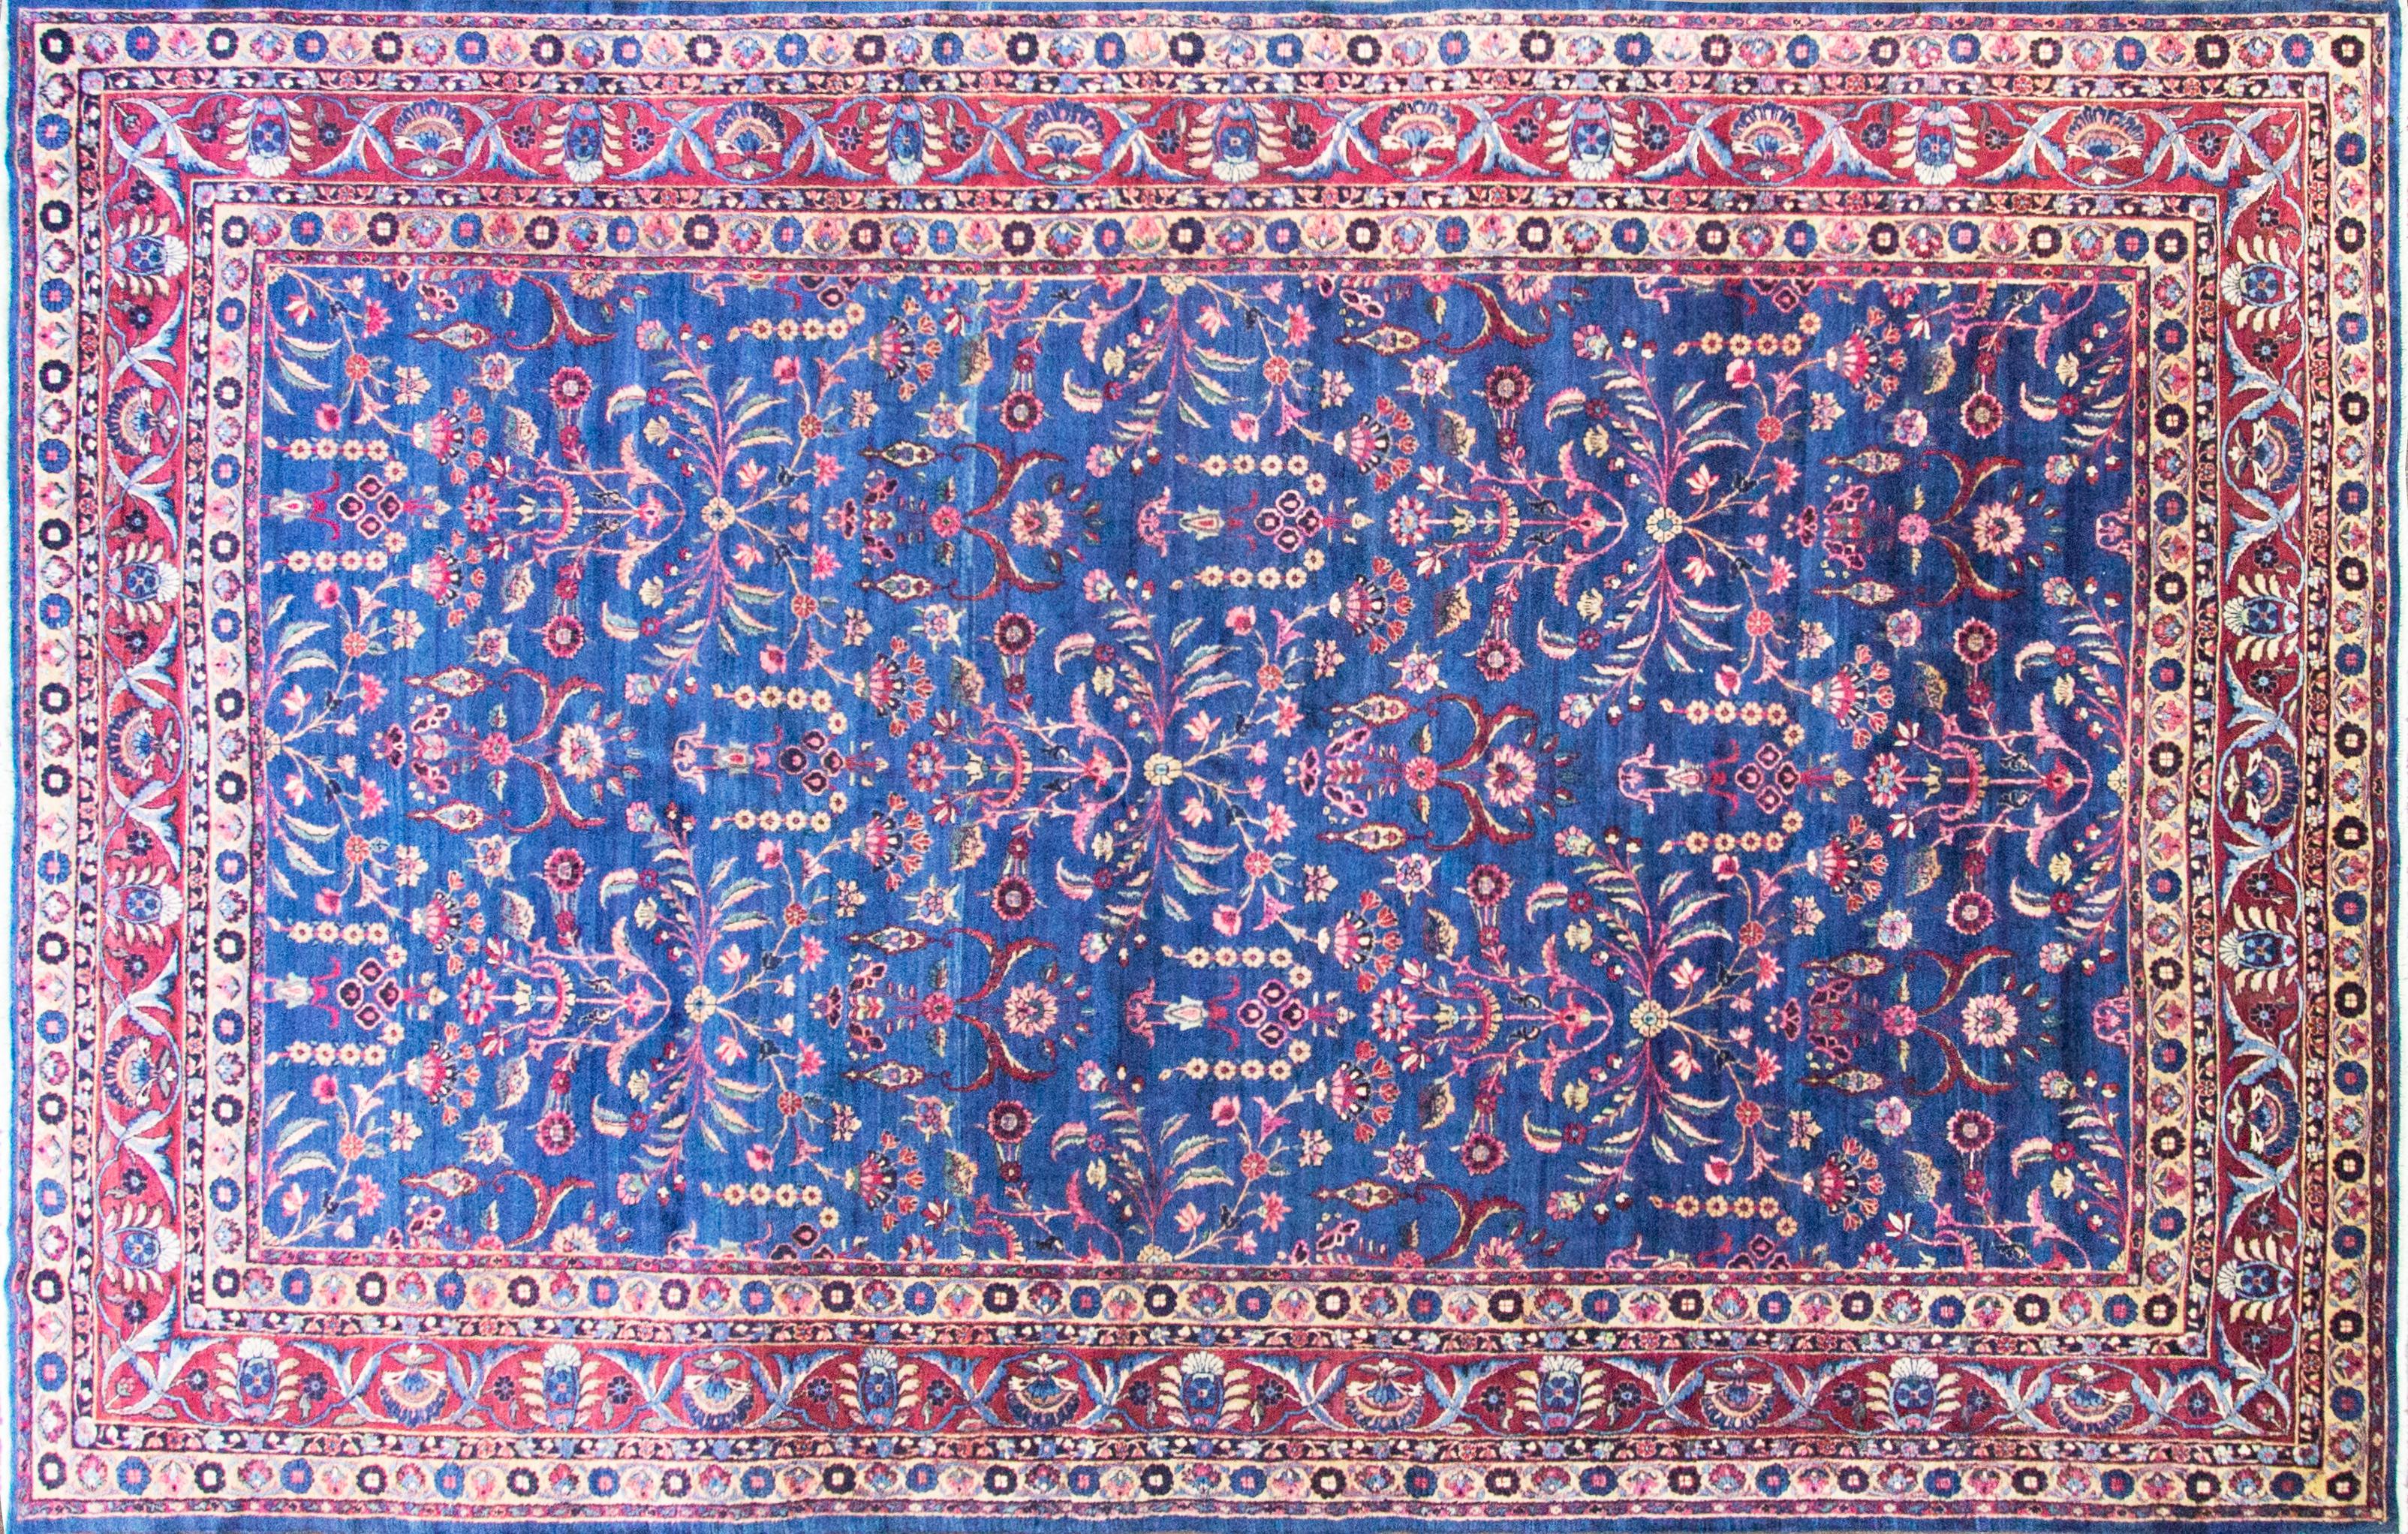 Antique Persian Laver Kerman carpet, amazing color in excellent condition with unique blue background.
Kirman was a very important antique rug weaving centre dating from the Golden Age of Persian culture under the Safavid dynasty in the 16th